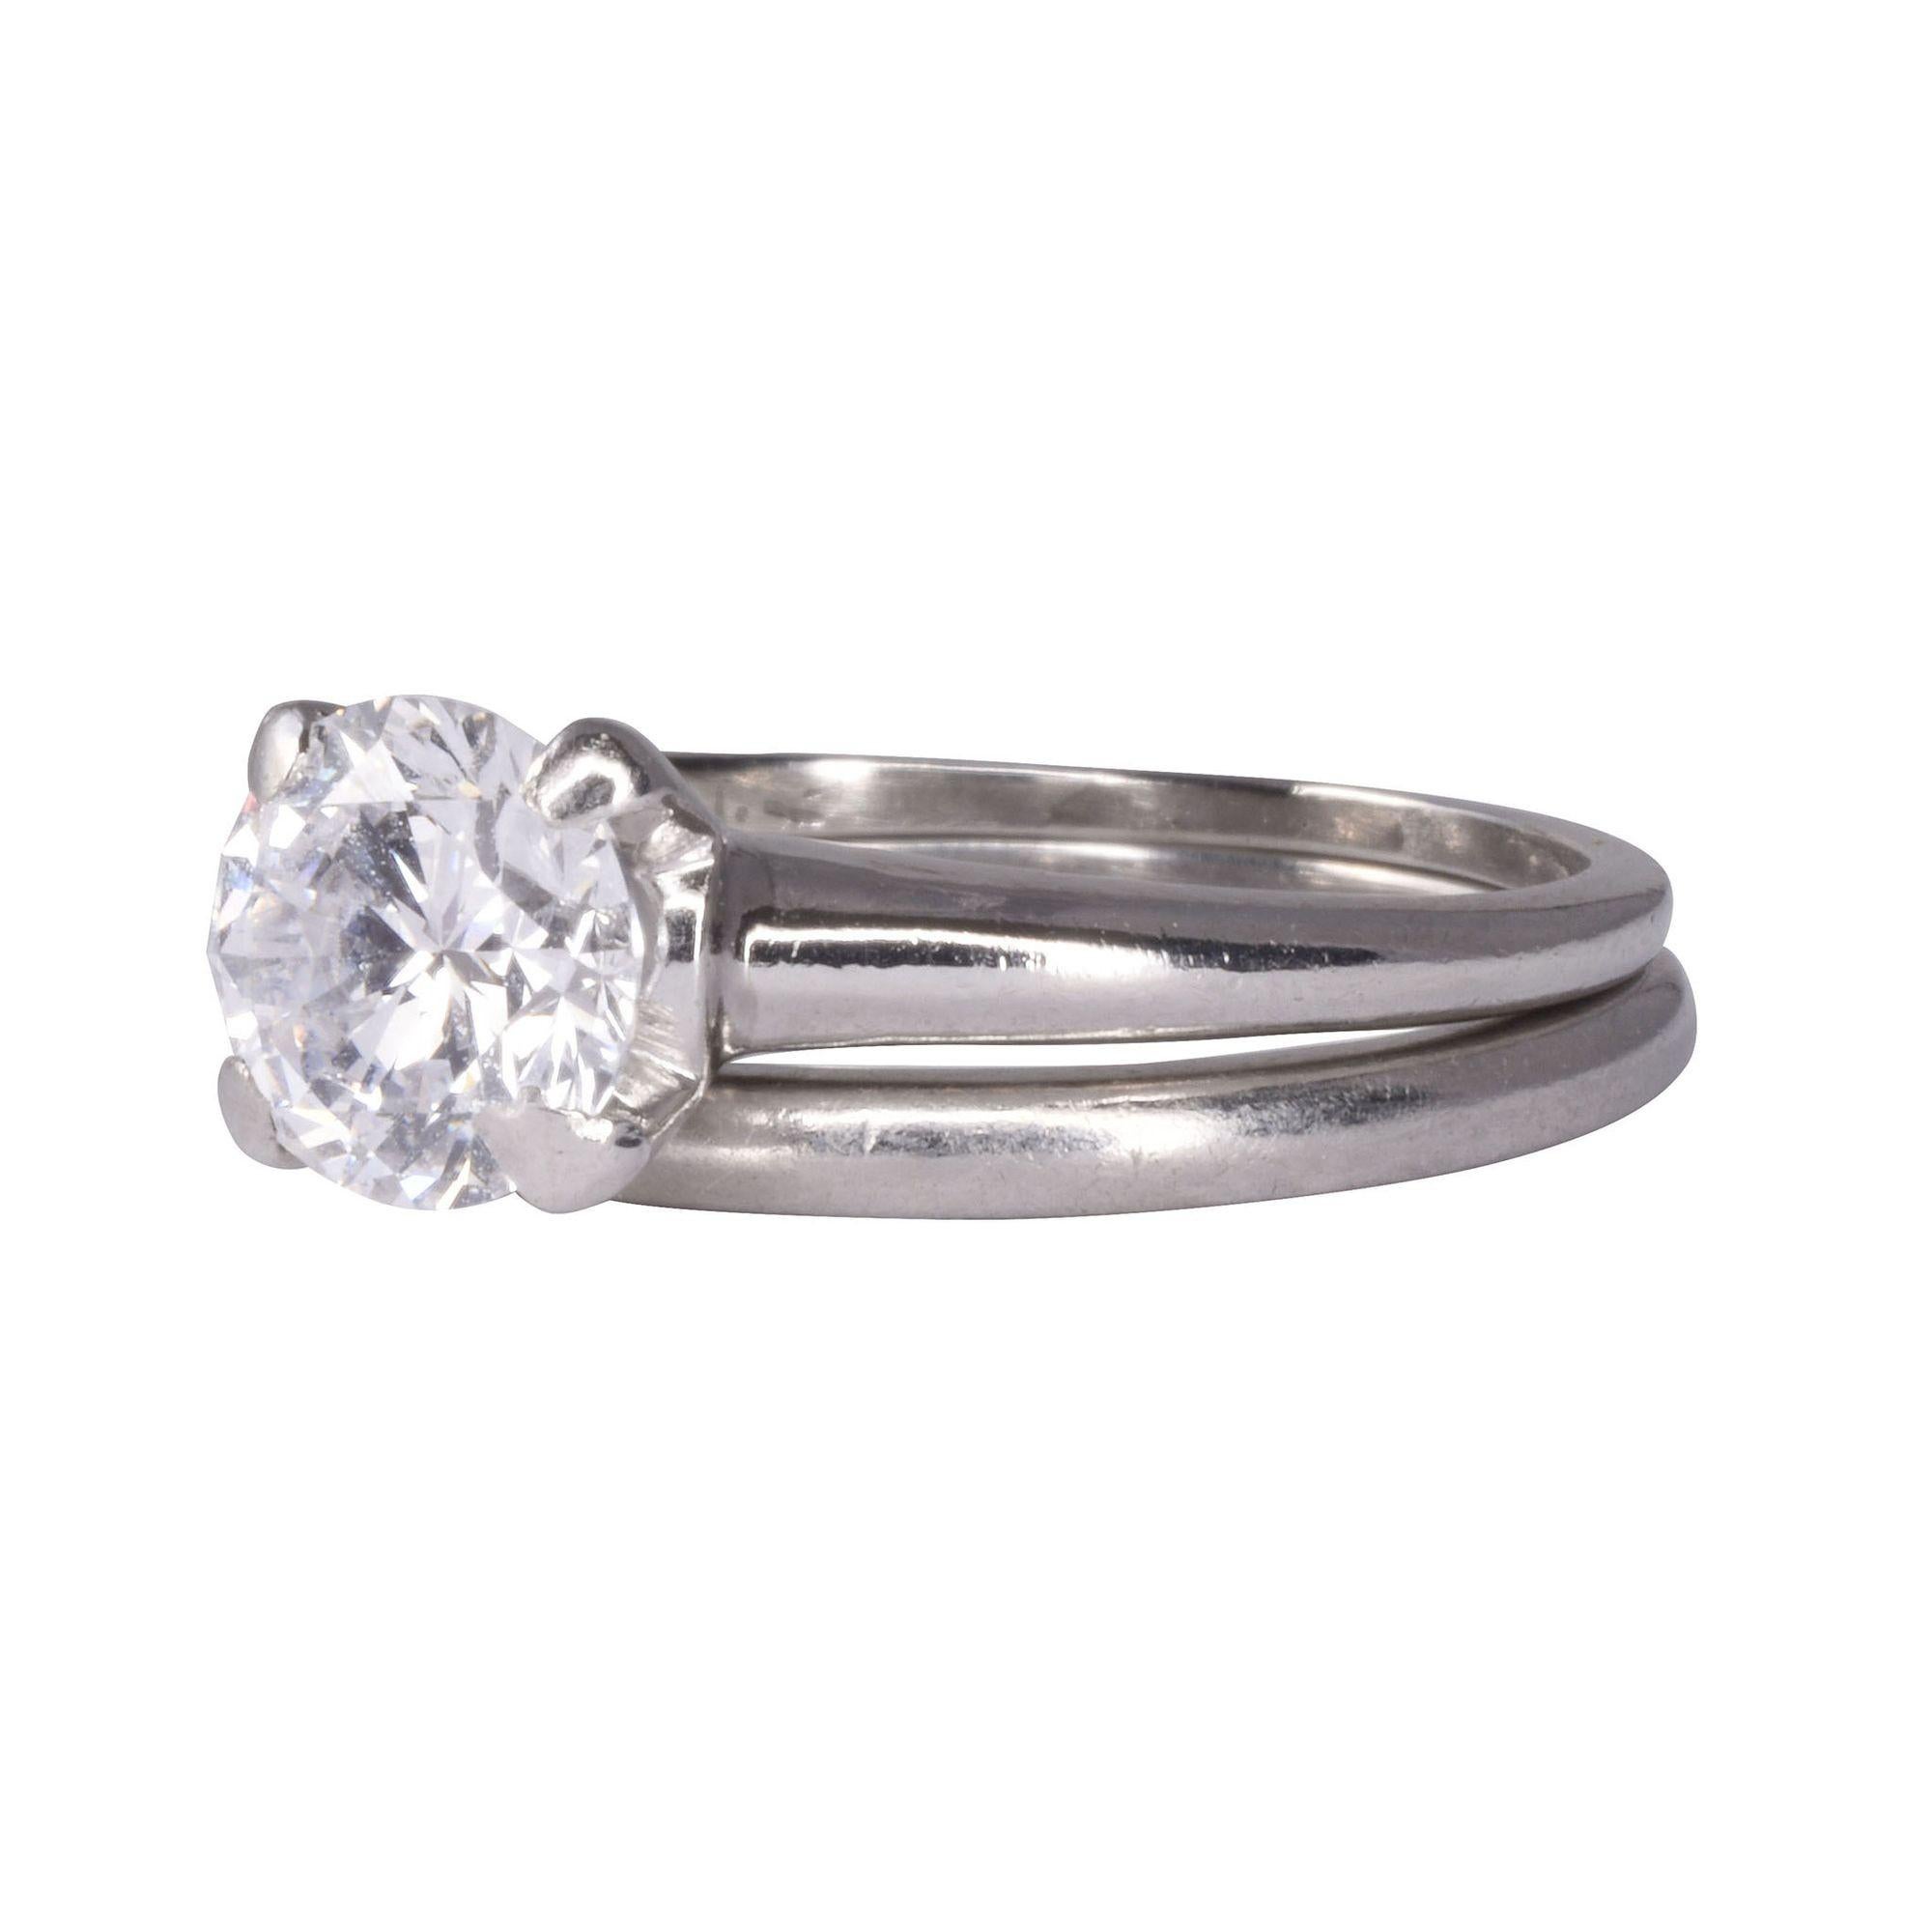 Estate VS diamond solitaire platinum wedding set. This platinum wedding set features a solitaire diamond engagement ring. The diamond is a .80 carat with VS clarity and H color. This solitaire diamond wedding set is a size 4.75. [KIMH 2101 P]